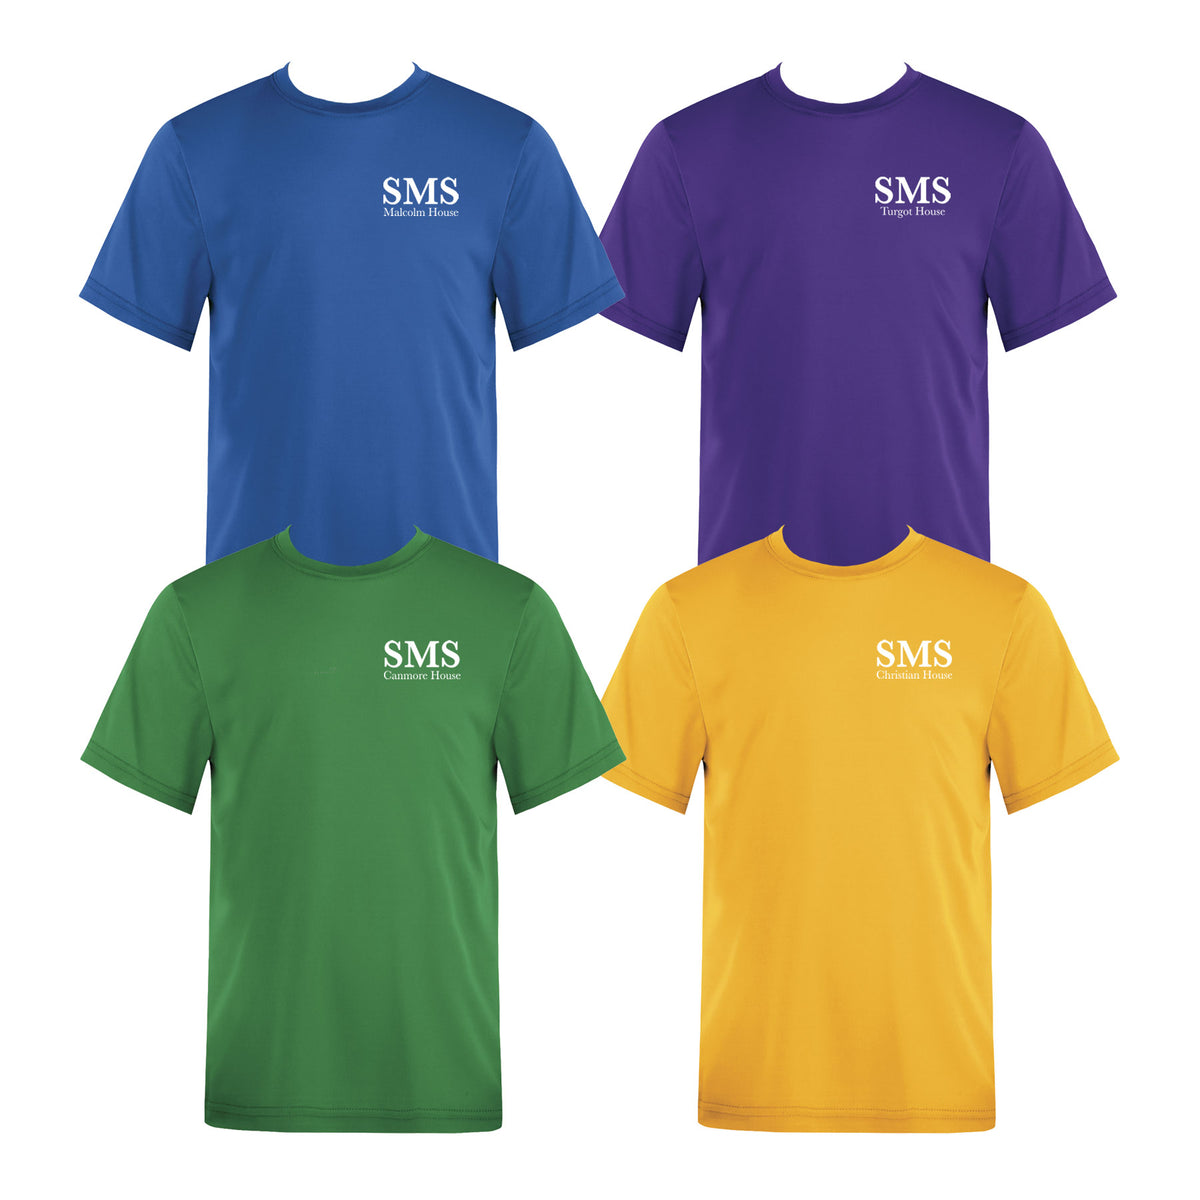 SMS HOUSE T-SHIRT, WICKING, YOUTH